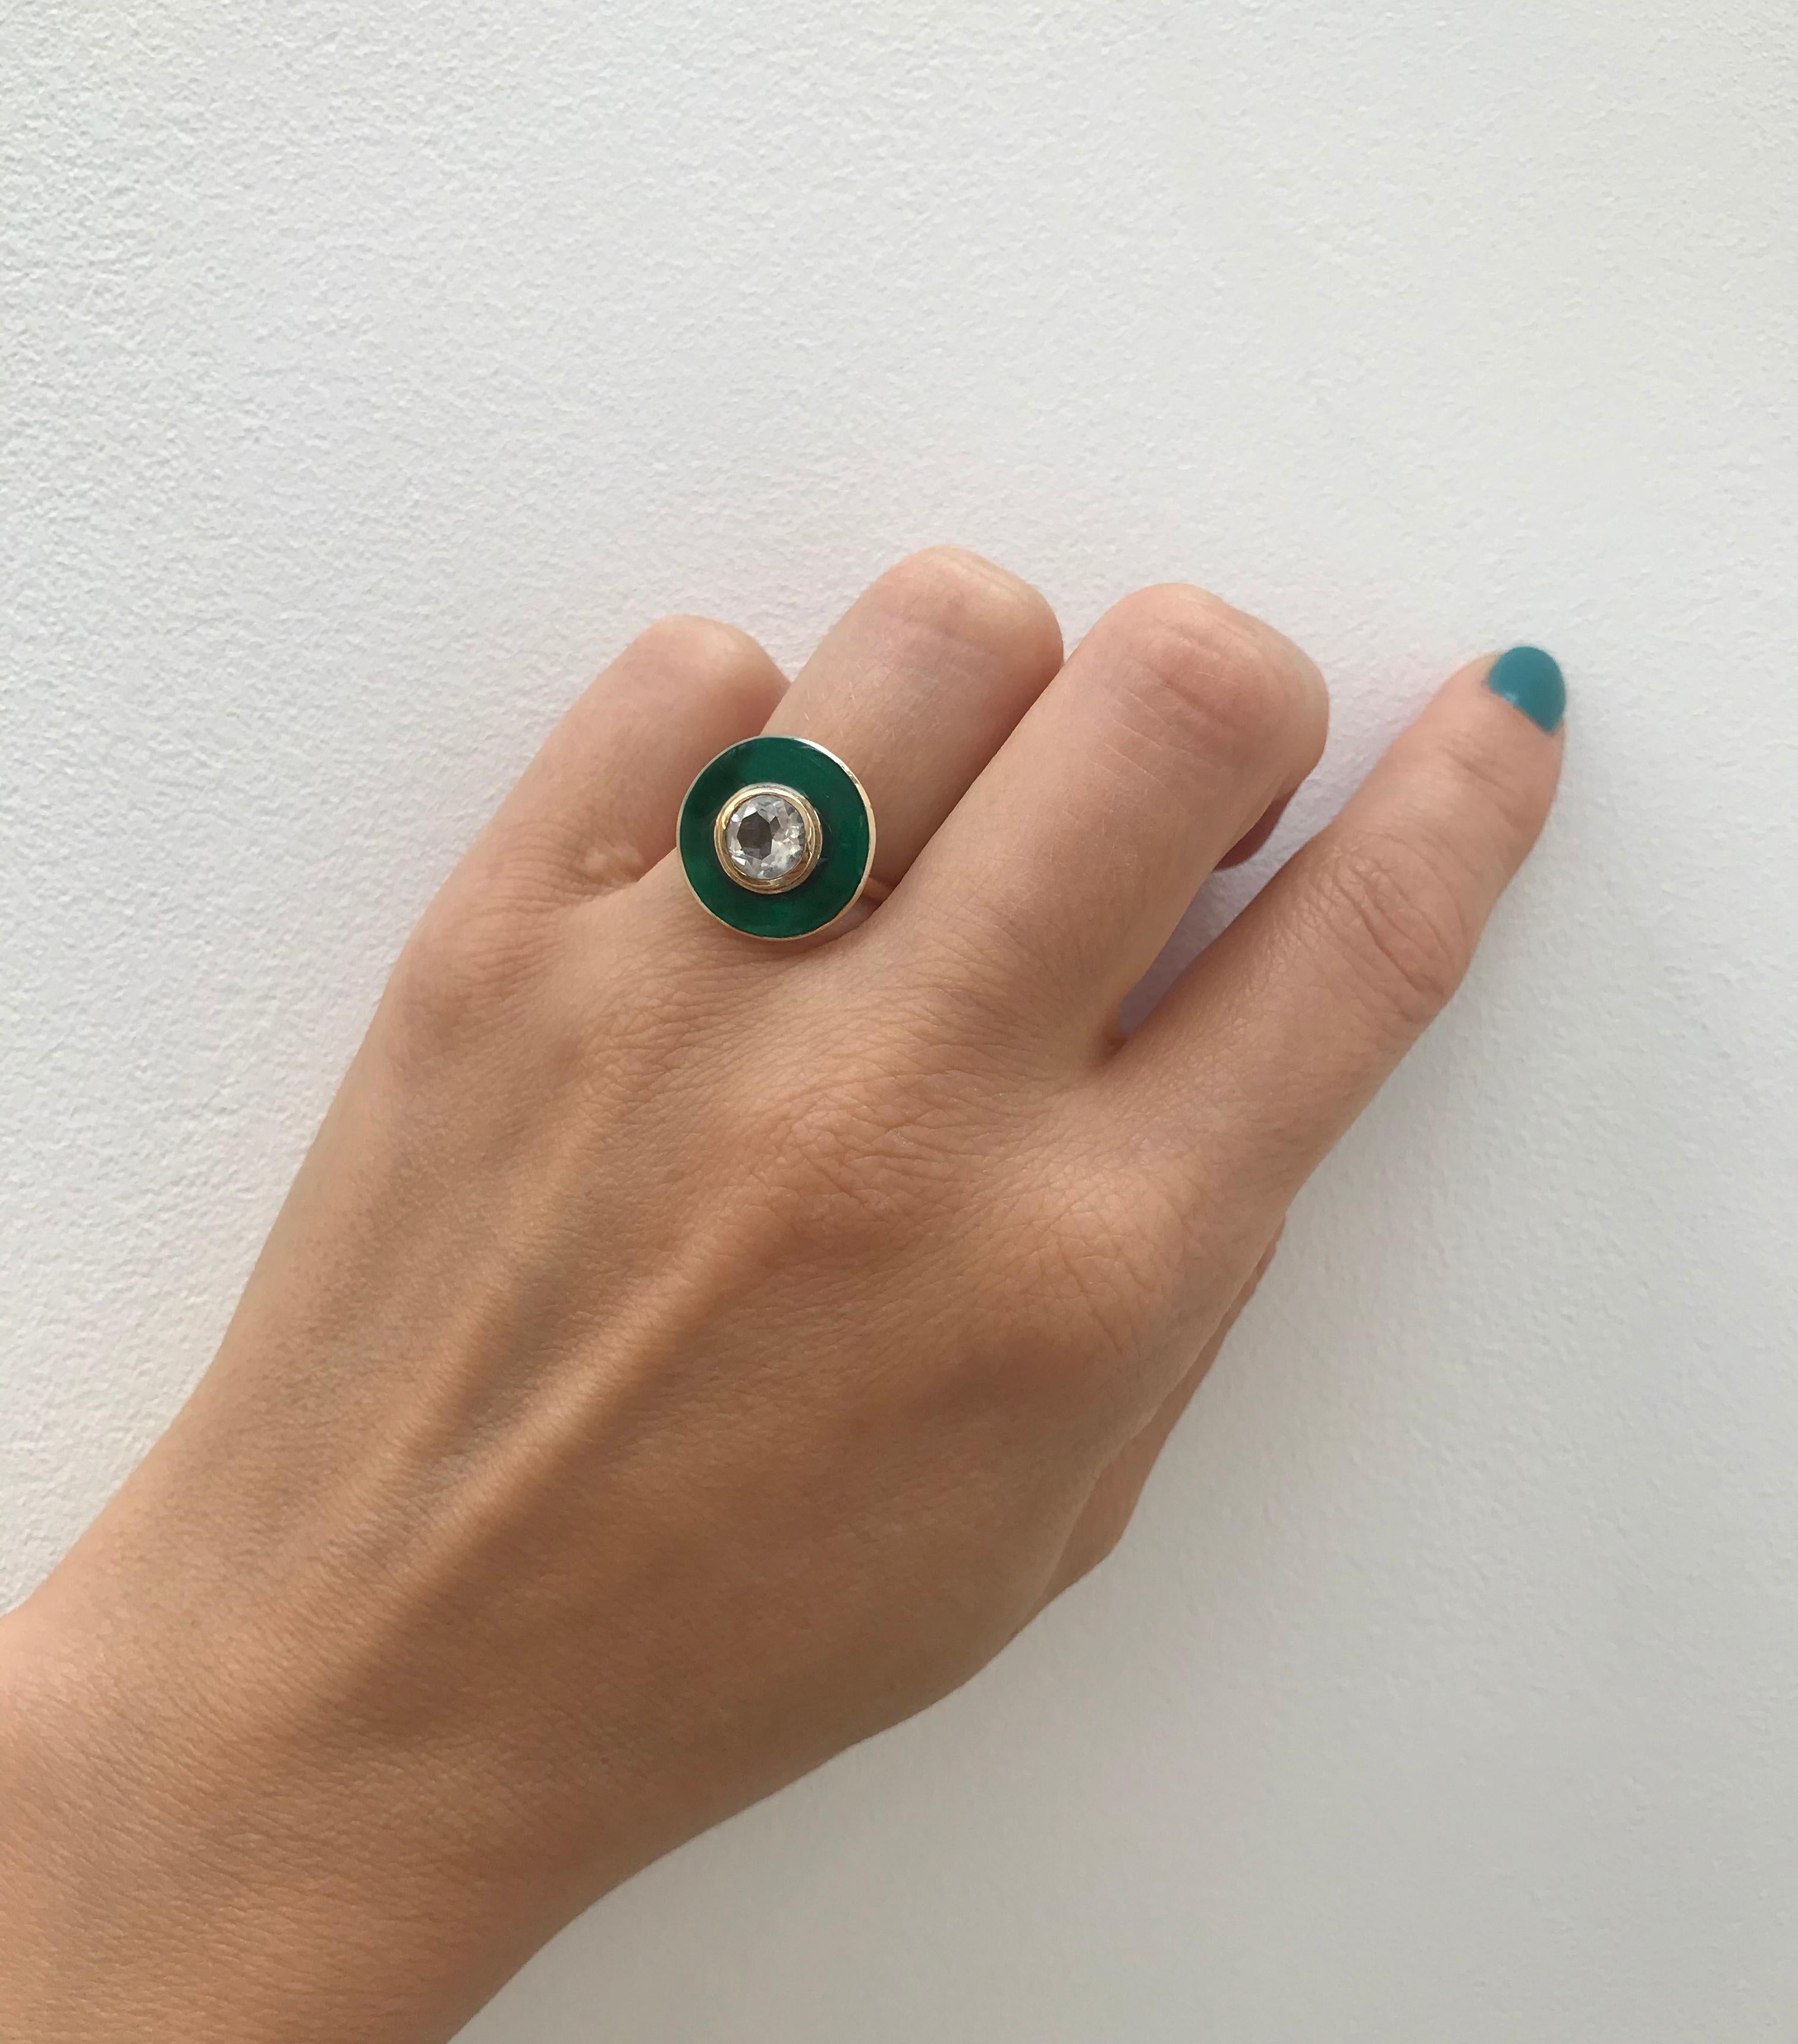 Rooted in clean, classic lines, this a bold yet elegant cocktail ring reflects the individuality of the wearer. Inspired by the rainforest of the Amazon we used yellow gold, white topaz and rainforest green vitreous enamel to celebrate a warm summer